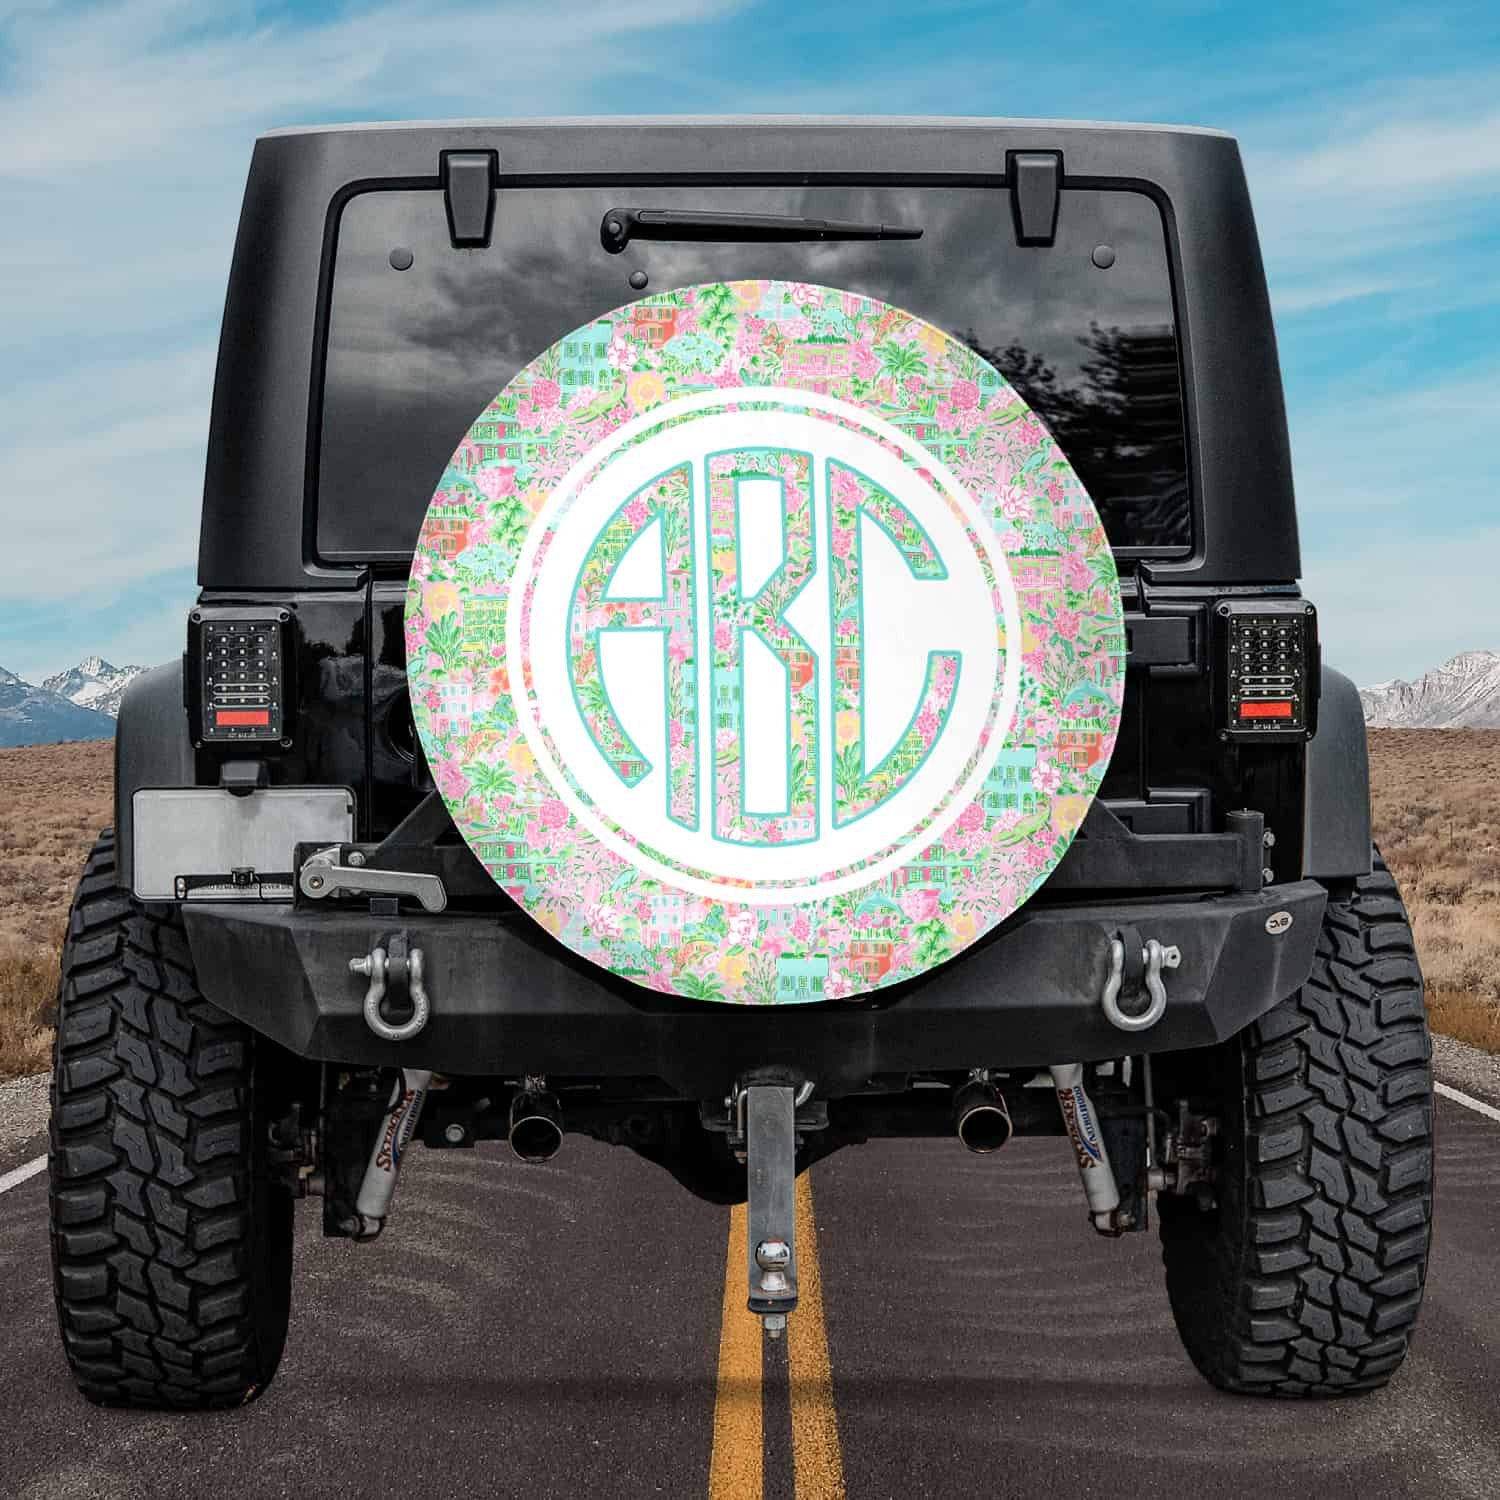 Custom Kansas City Spare Tire Cover Personalized Wheel Tire Cover Add Name Number Waterproof Dust-Proof Protectors for Trailer RV SUV - 2